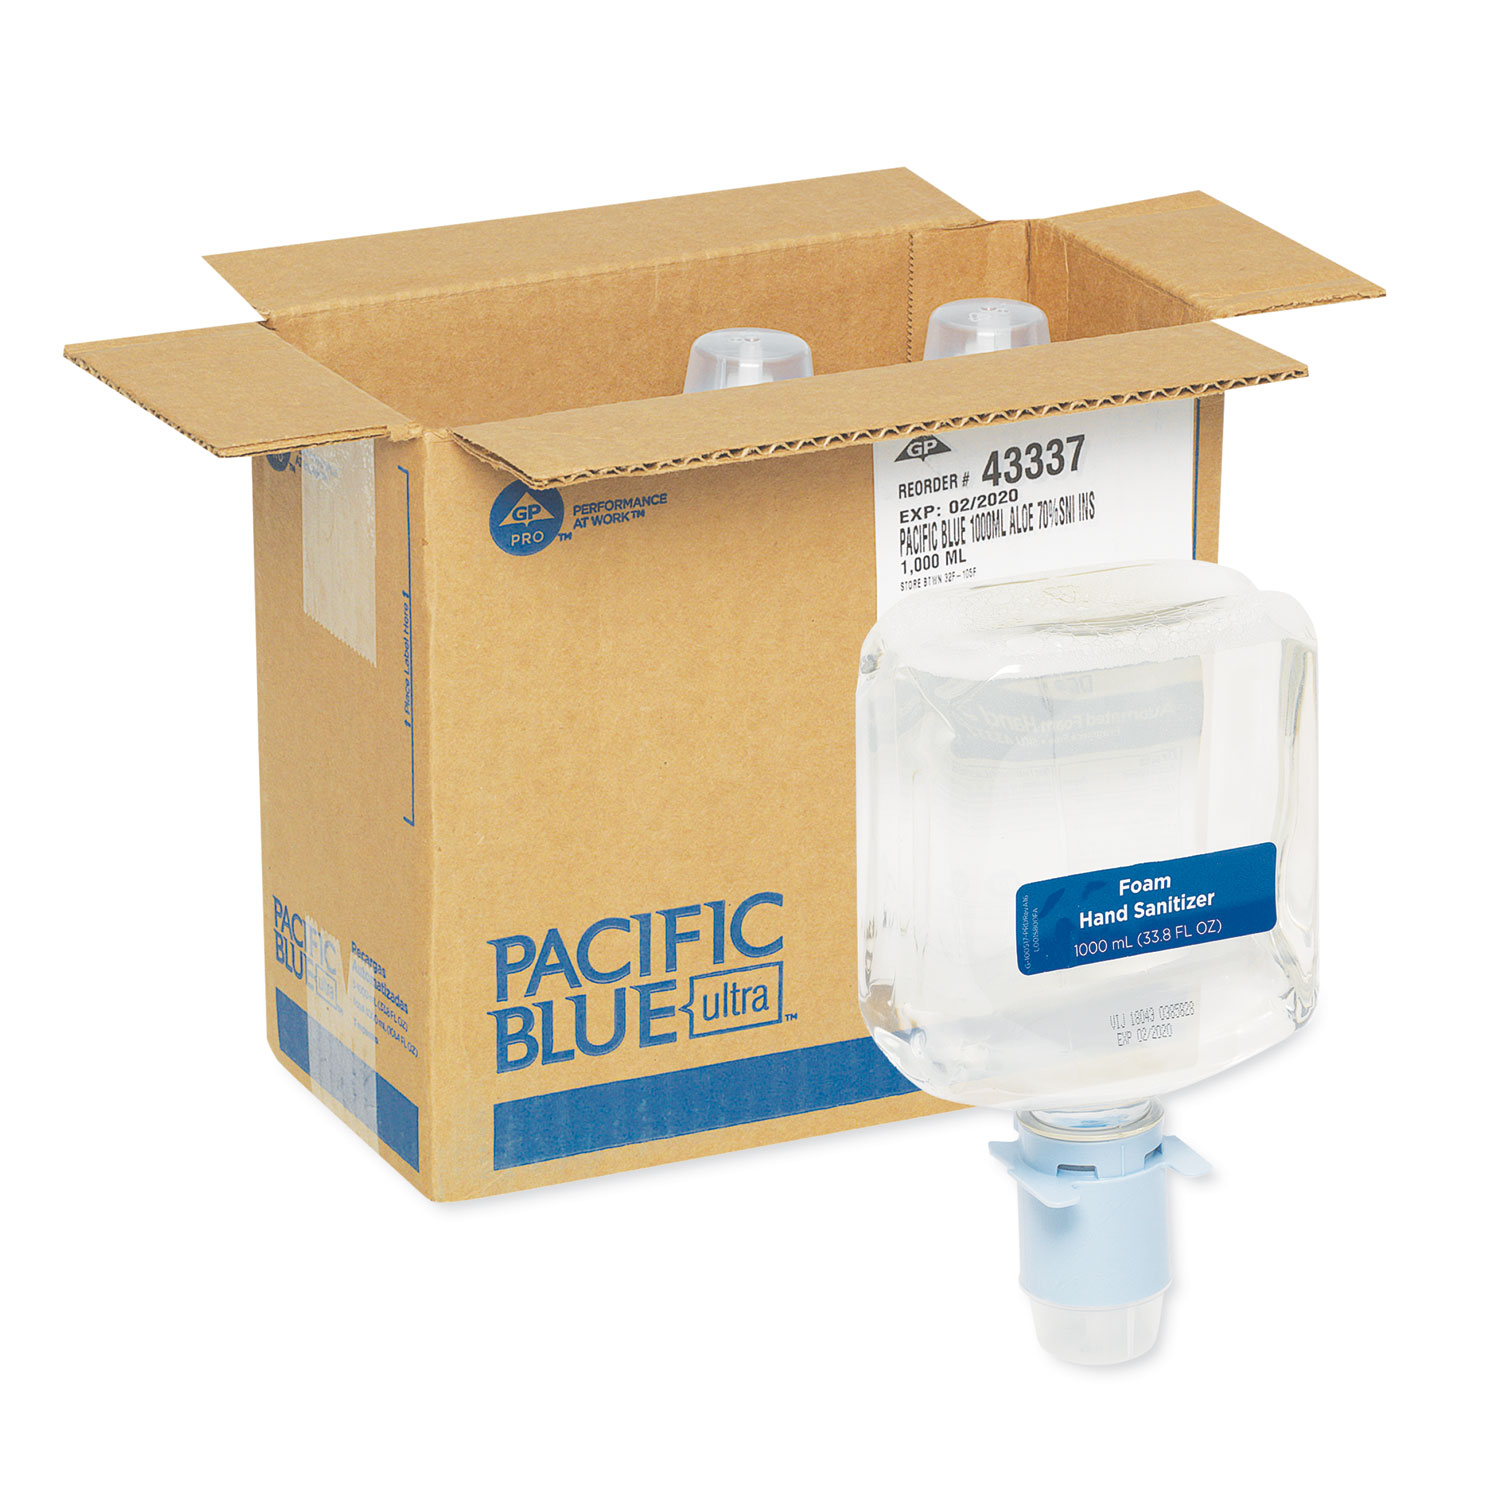  Georgia Pacific Professional 43337 Pacific Blue Ultra Automated Sanitizer Dispenser Refill, 1000 mL Bottle, 3/CT (GPC43337) 